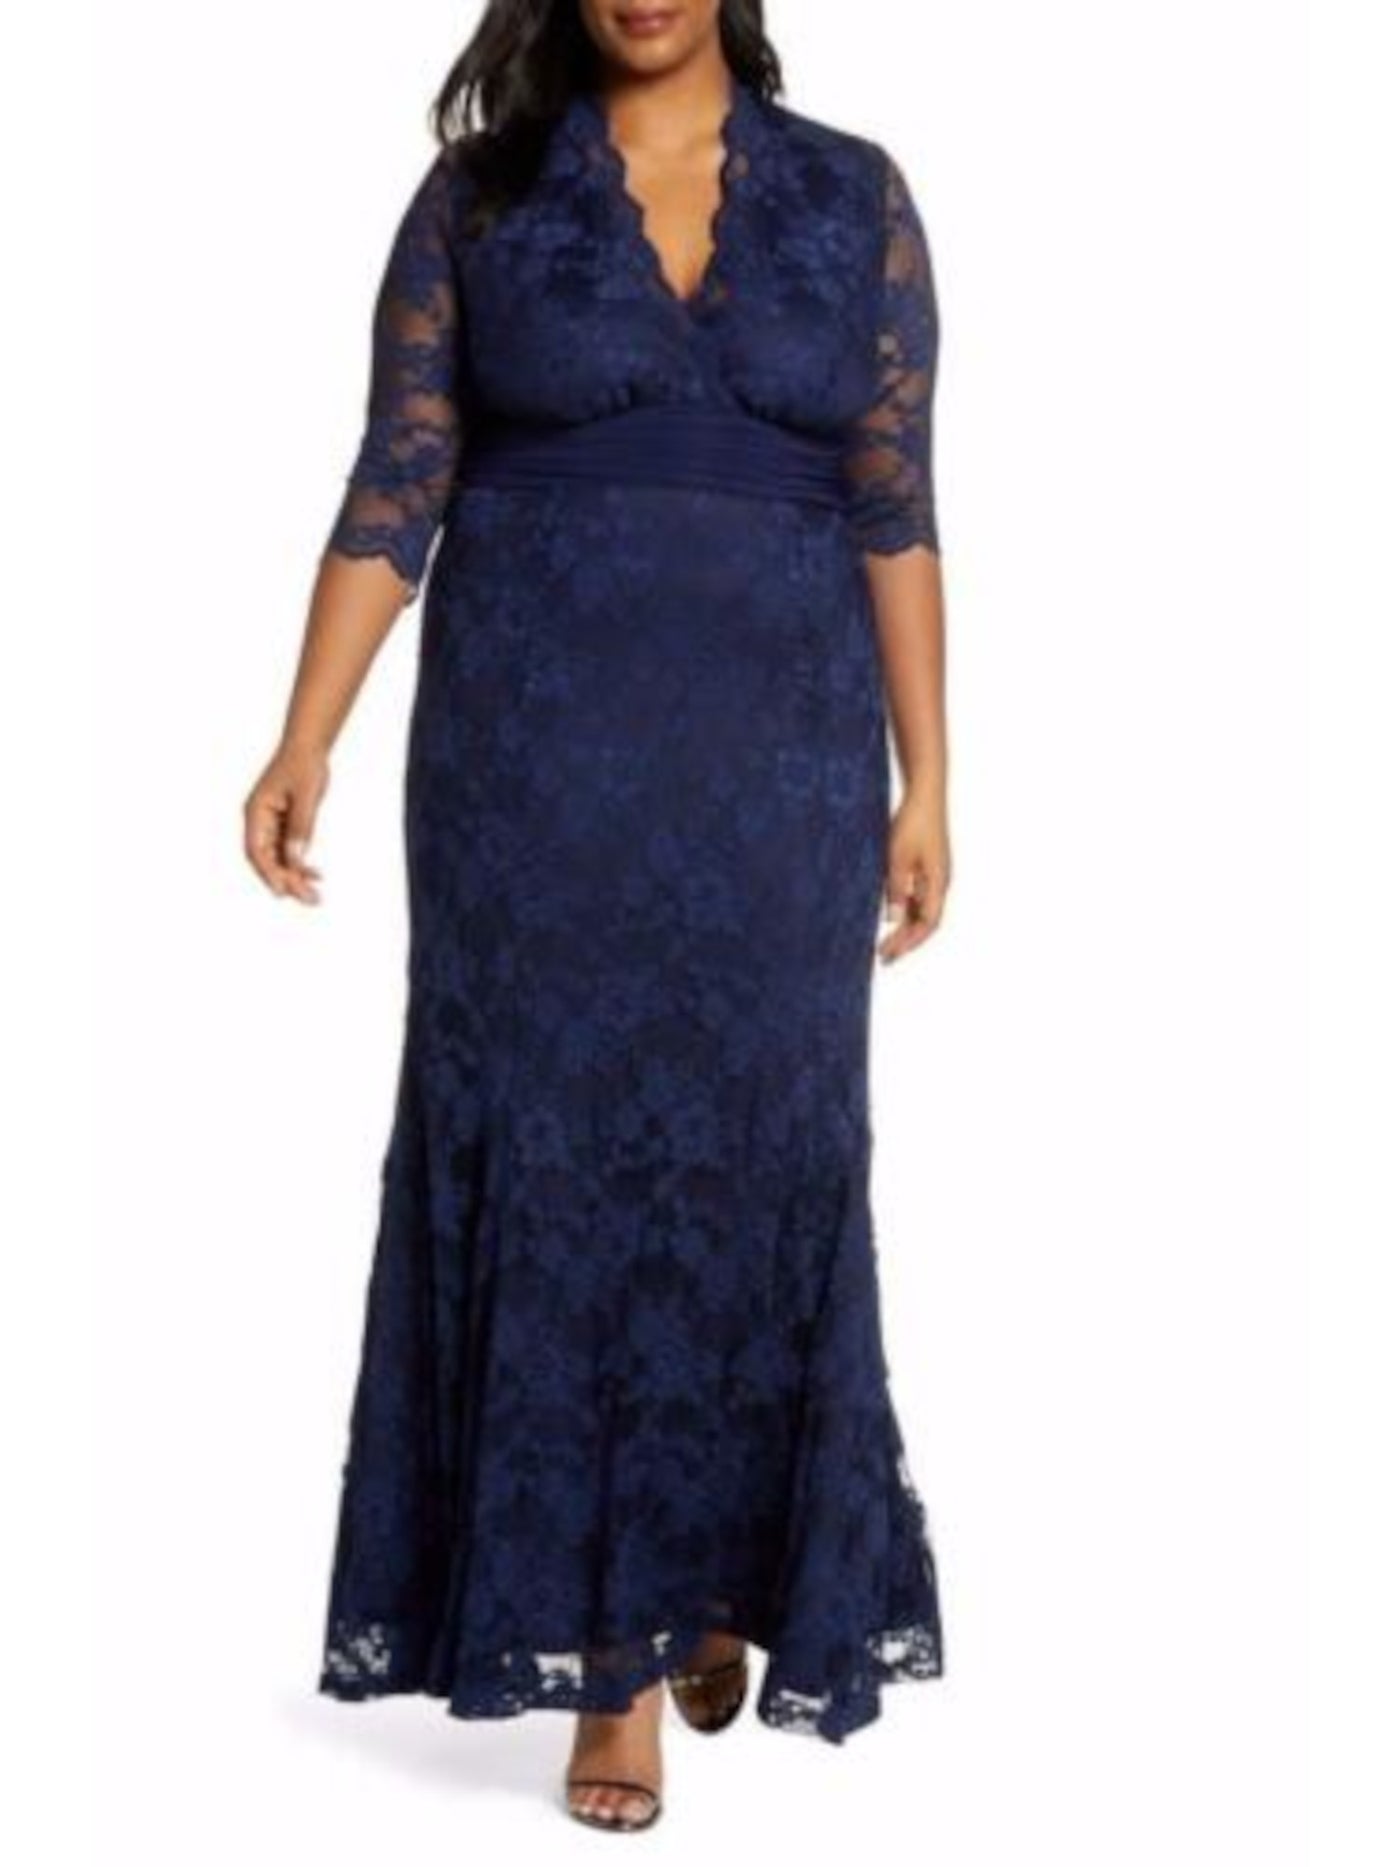 KIYONNA Womens Navy Lace Scalloped Elbow Sleeve V Neck Maxi Evening Fit + Flare Dress Plus 2X